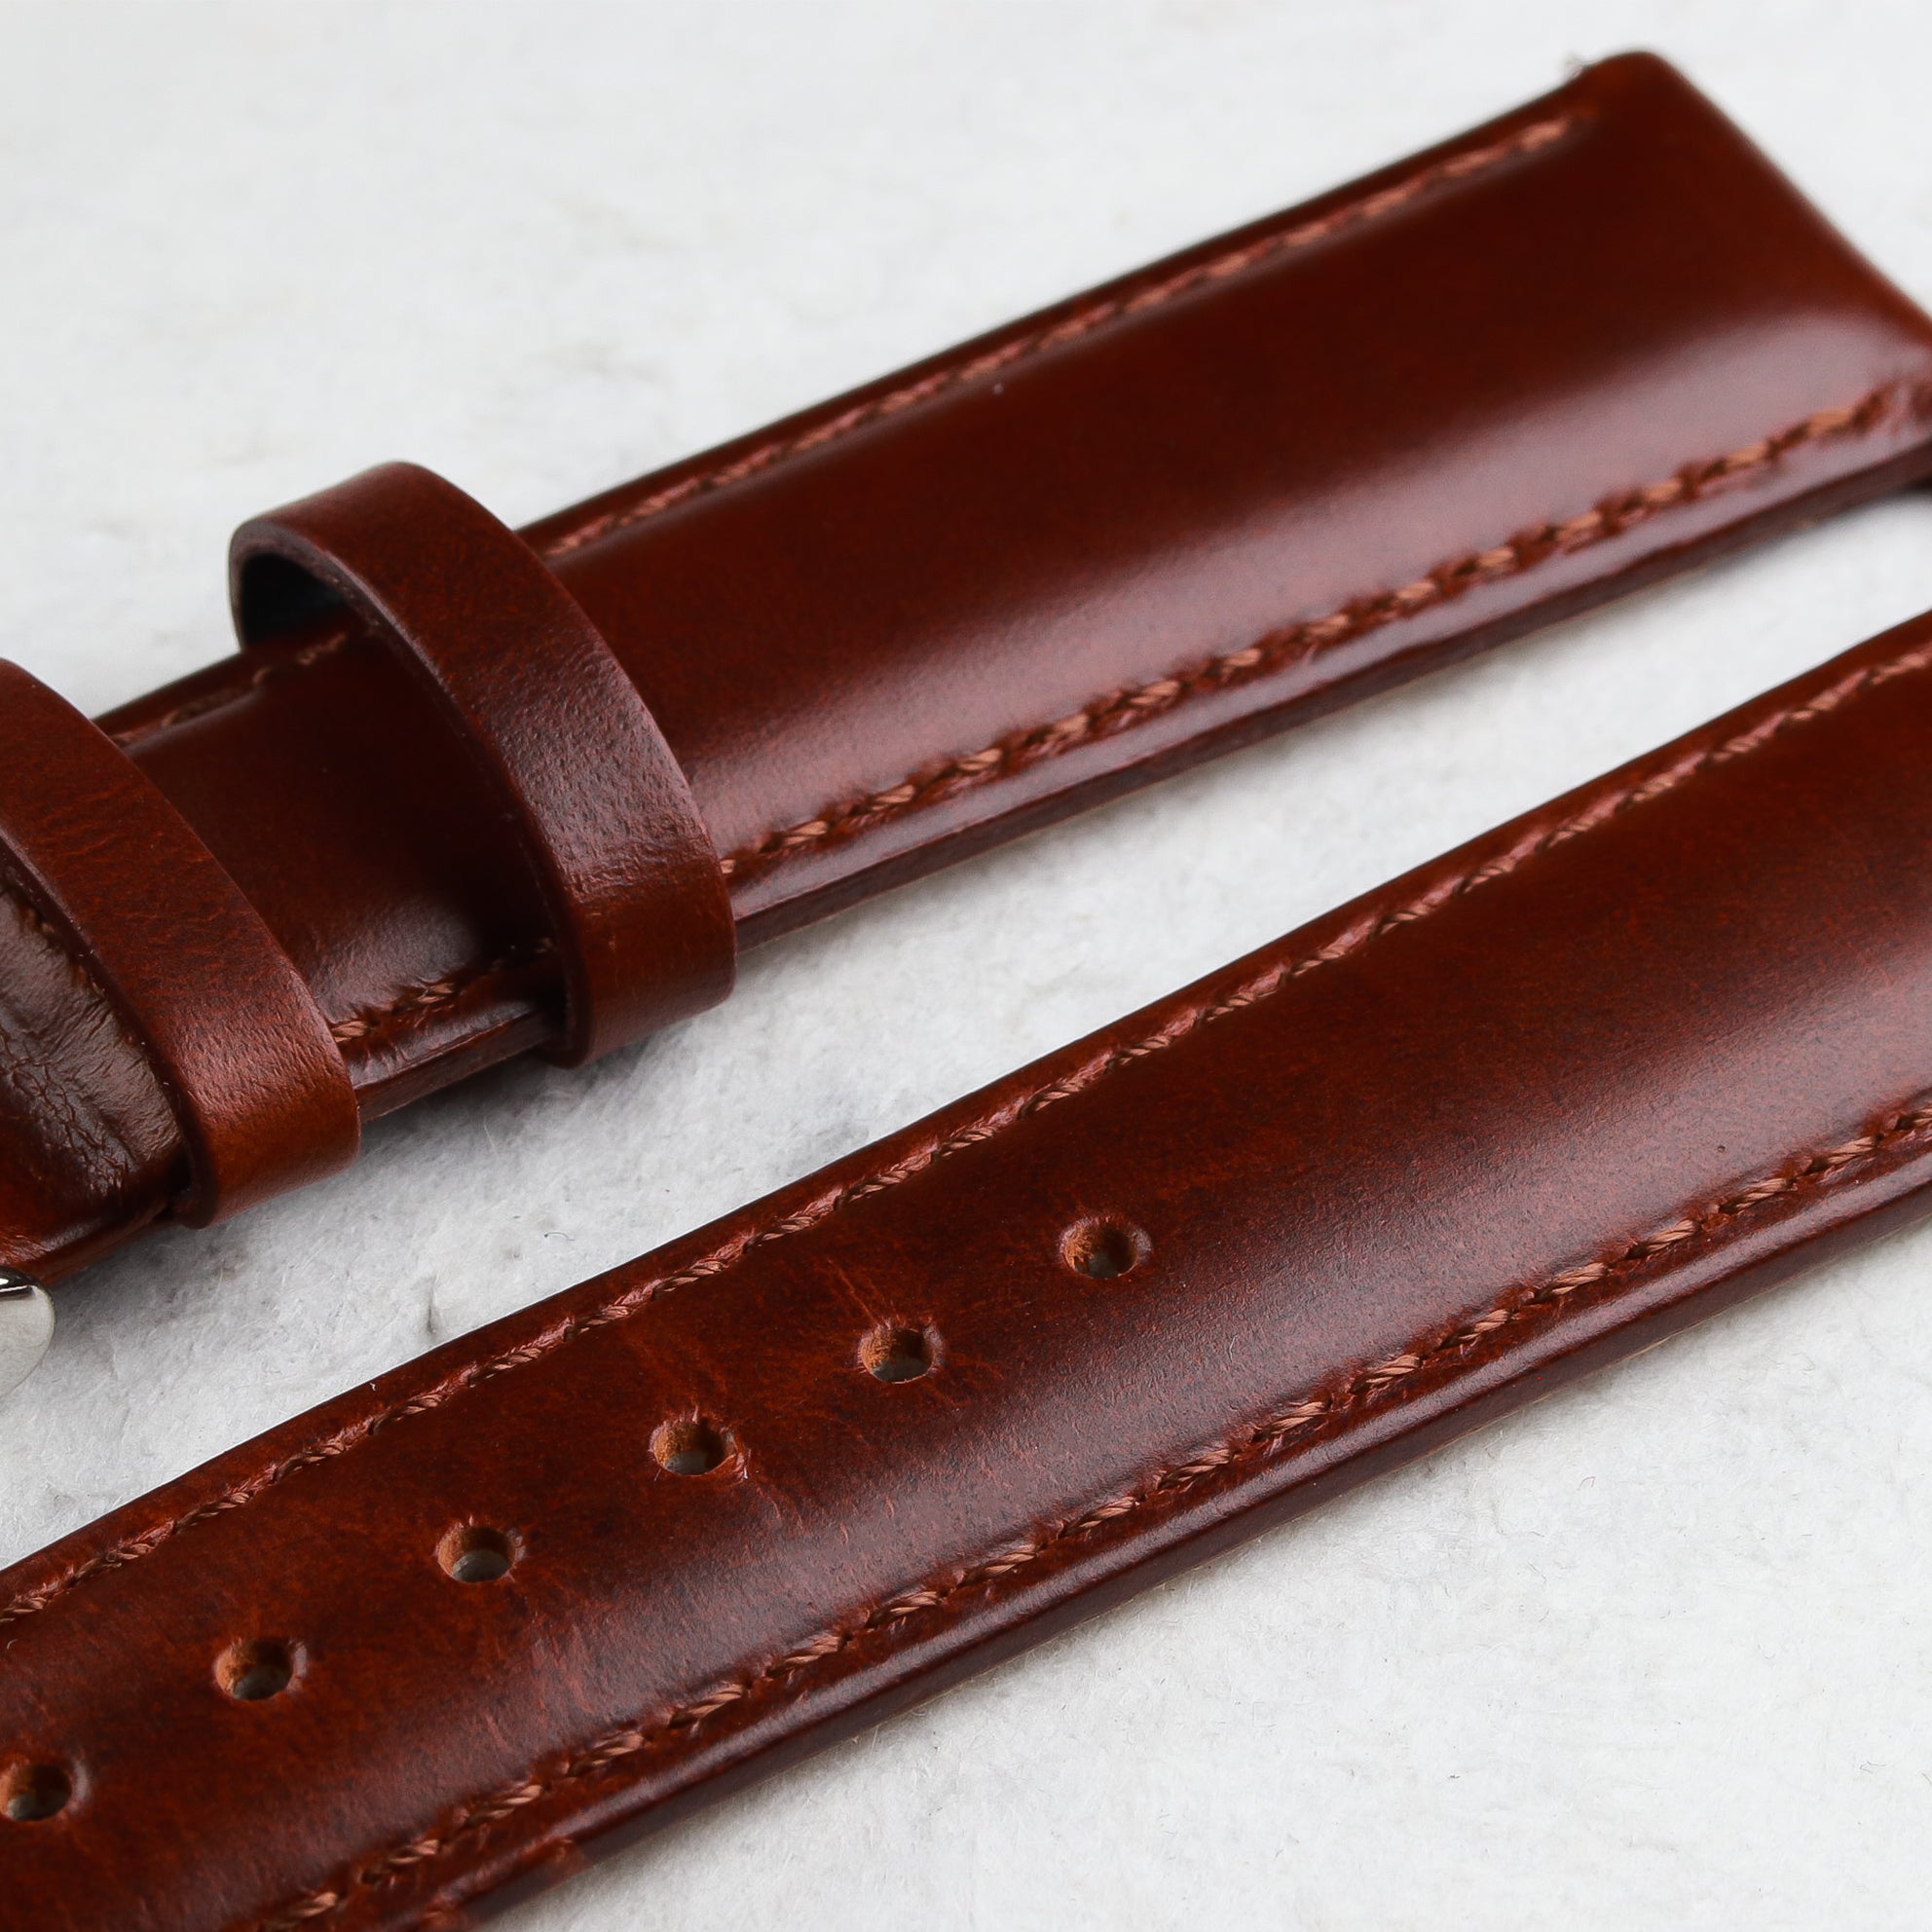 Calfskin Leather Strap - Wancher Watch Wancher Watch Wancher Watch Calfskin Leather Strap {{ Automatic Watch {{ Watch }} }} {{ Japan }}Wancher 20mm Calfskin Leather Strap with Silver Clasp and Quick-release pins Closure - premium quality leather strap for watches.